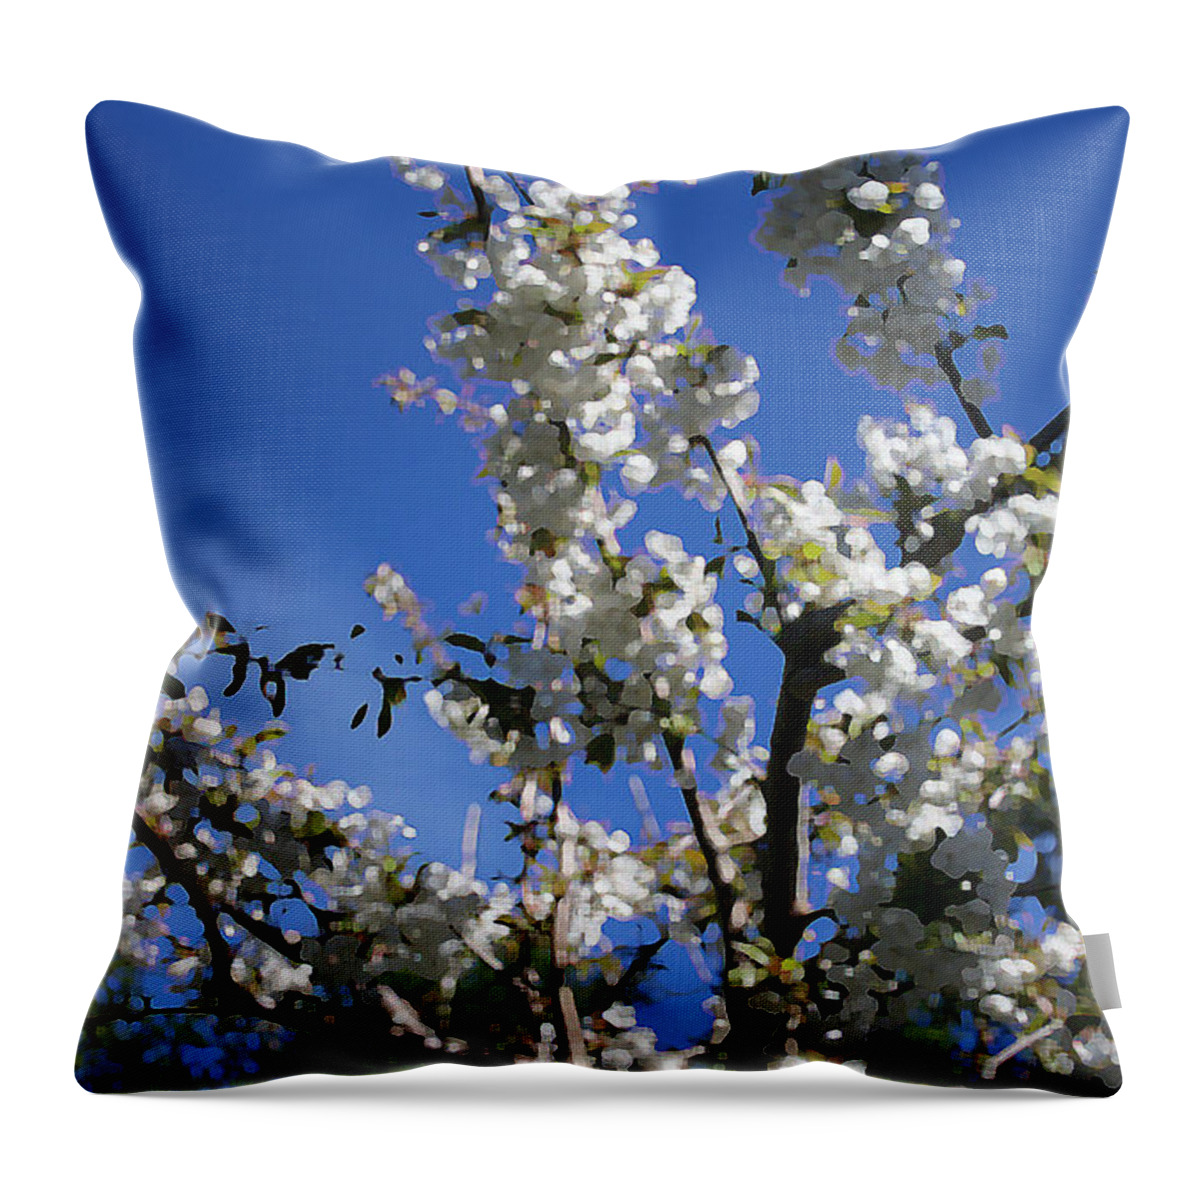 White Flowers Throw Pillow featuring the photograph Spring Cherry Blossoms by Mary Gaines